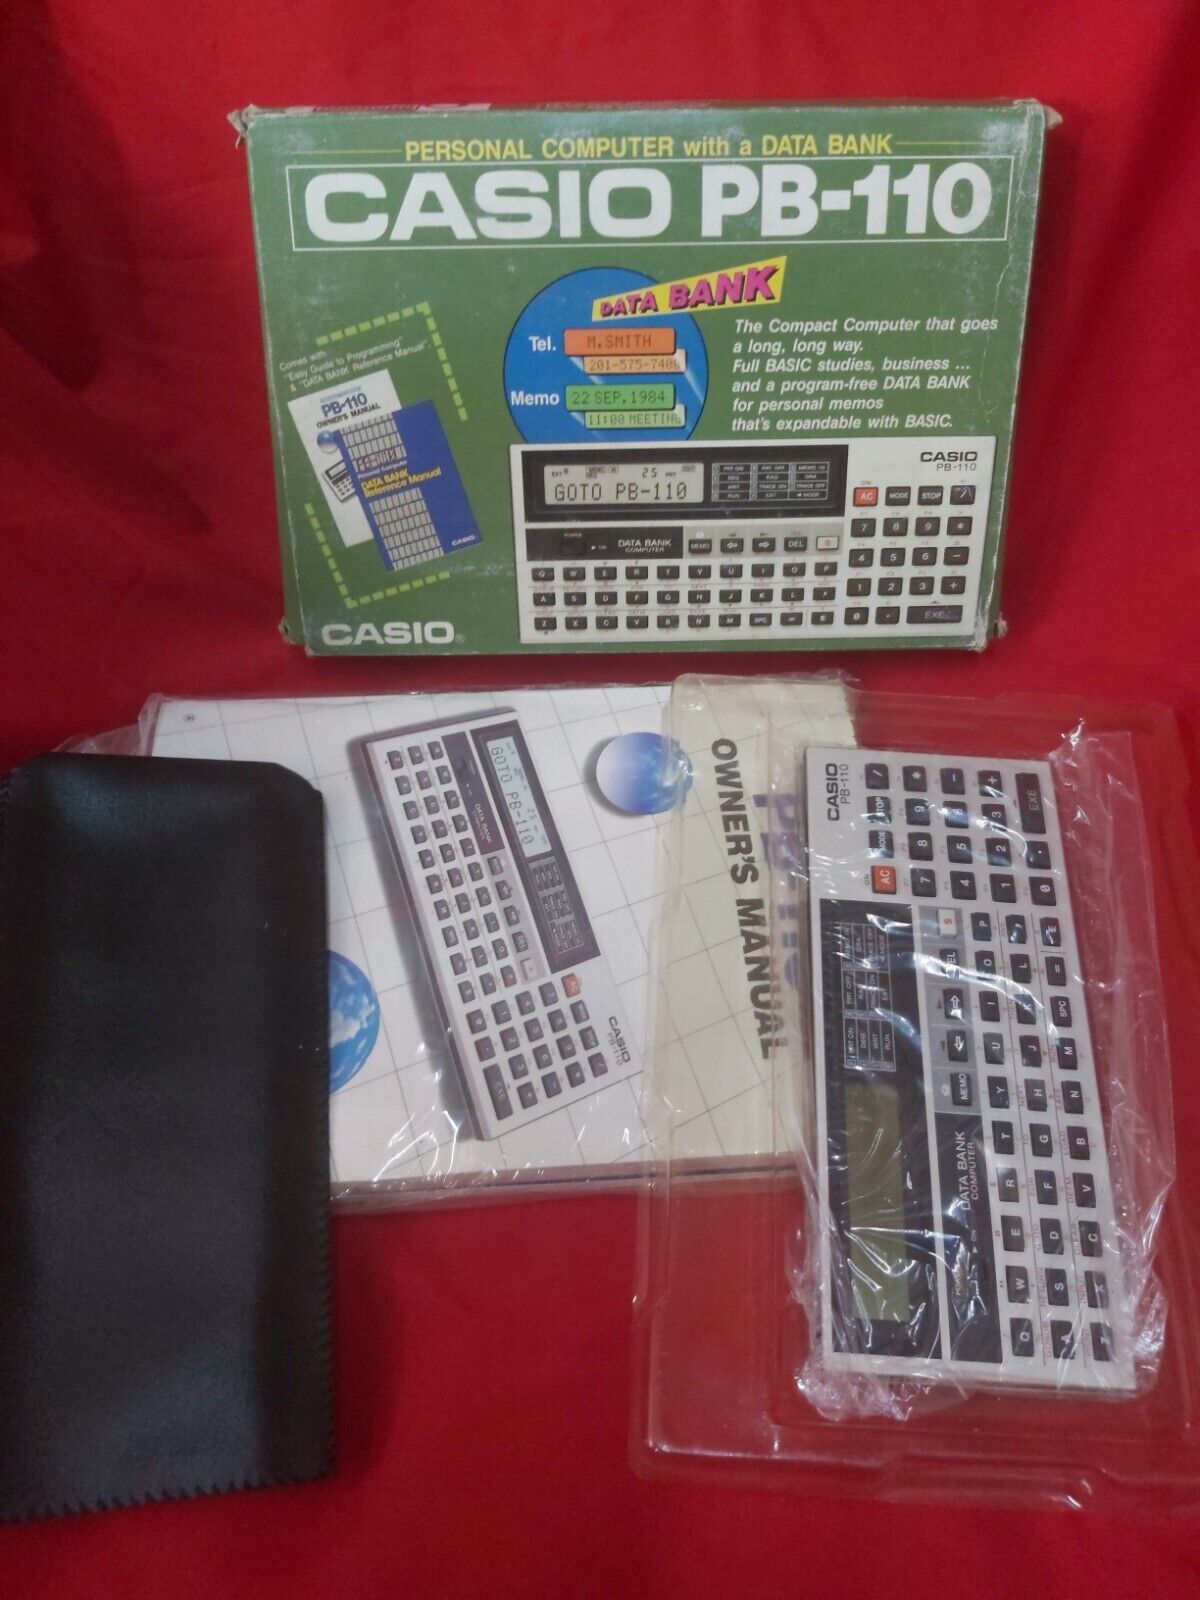 NOS-Vintage Casio PB-110 personal computer with original box and manuals 